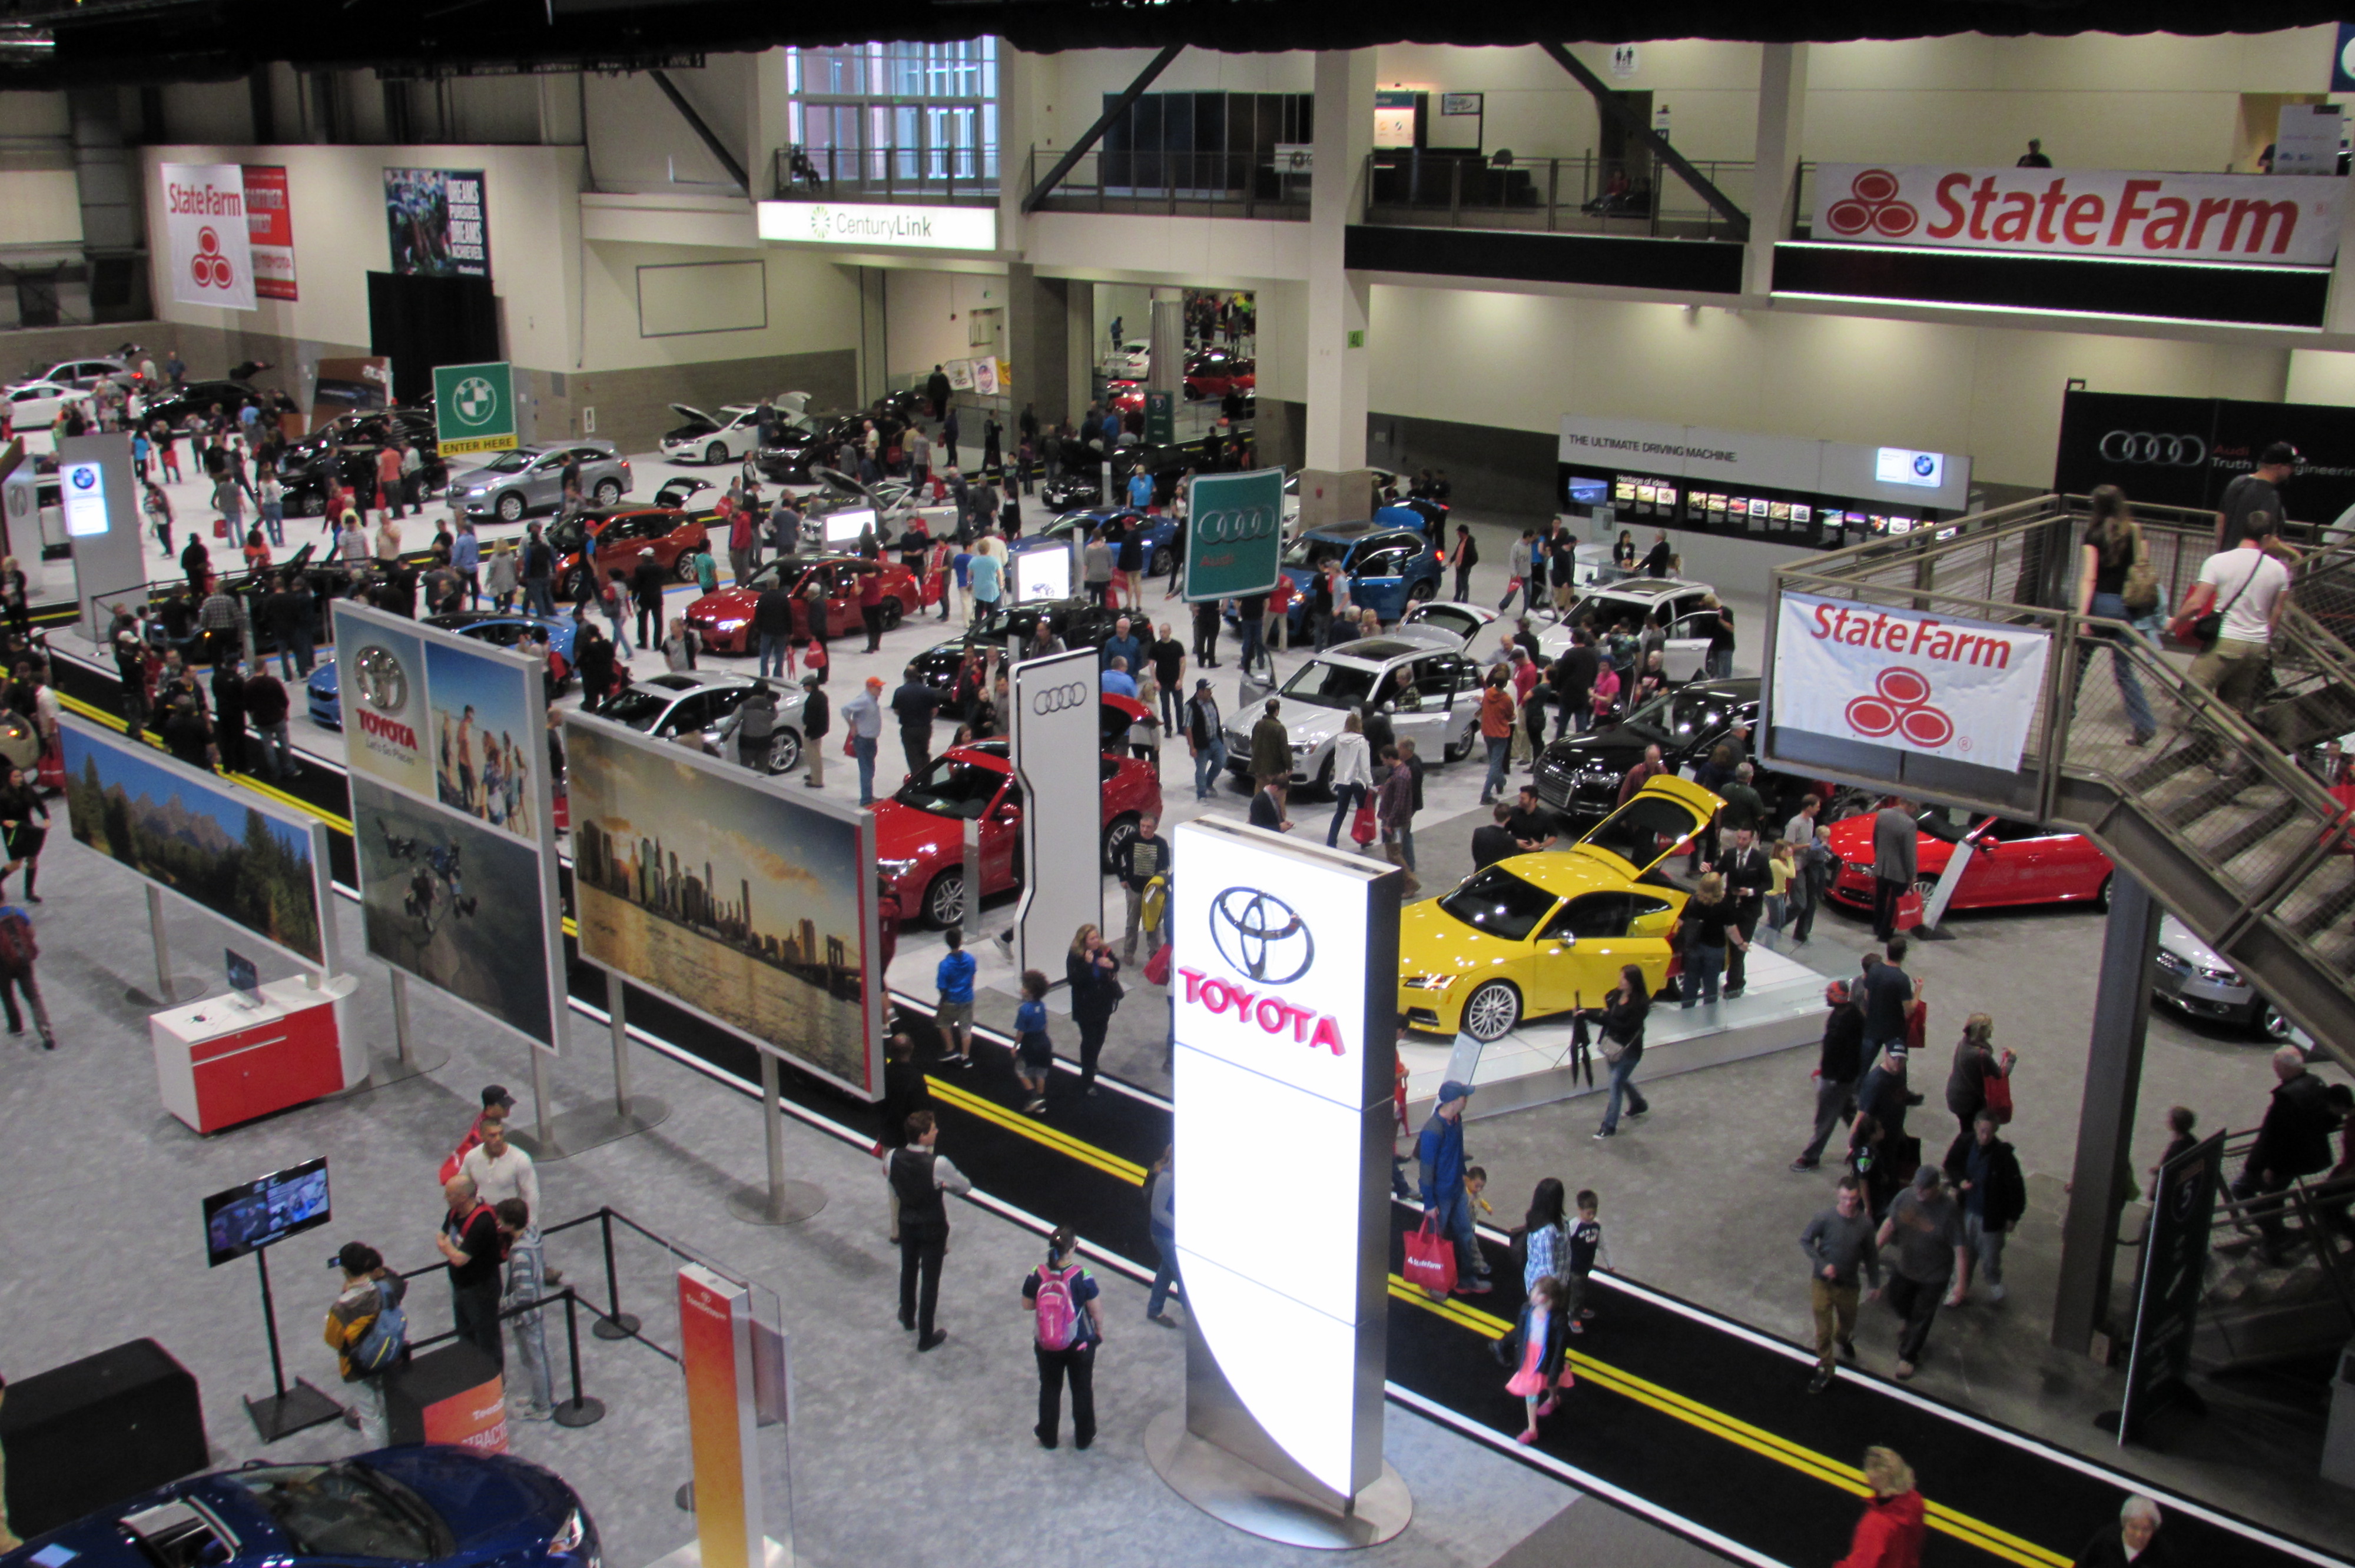 At the Seattle International Auto Show attendees can check out the latest technologies in more than 500 new vehicles and test drive over 50 different vehicles